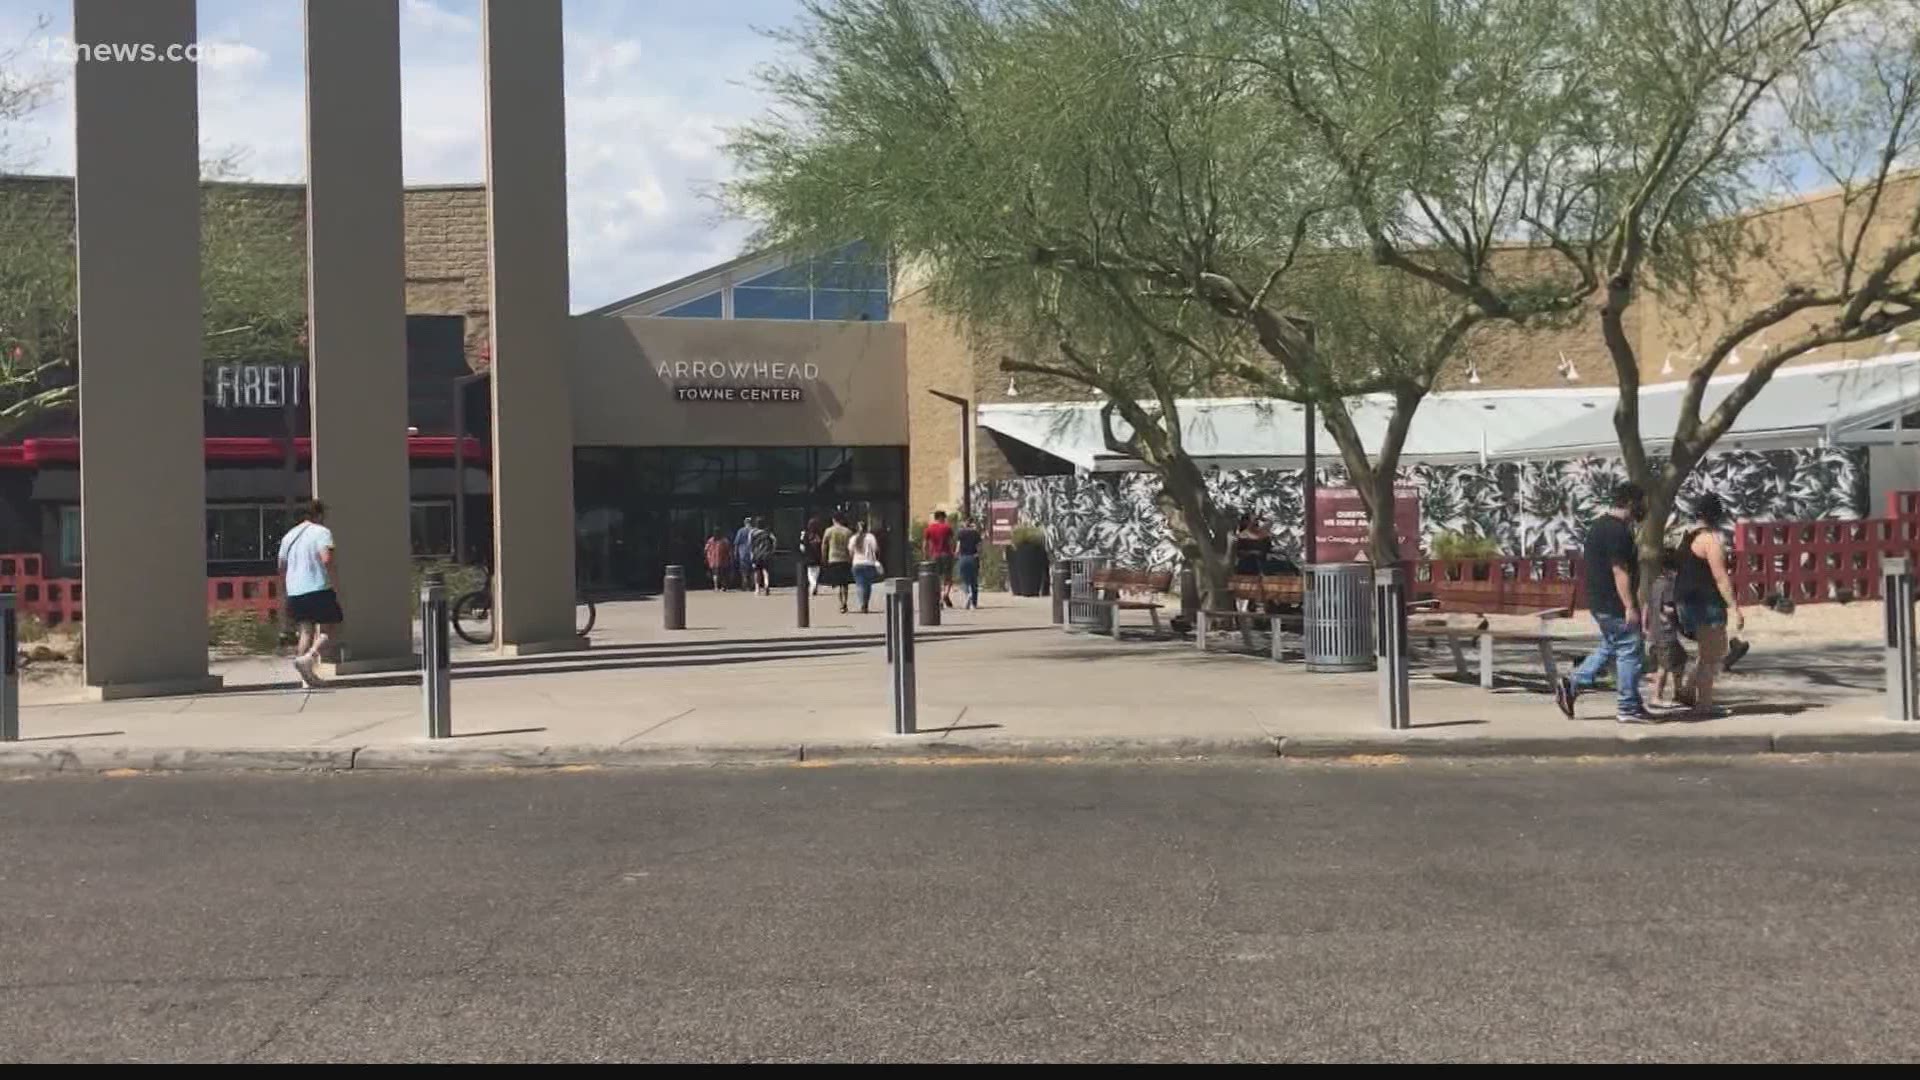 A large glass pane suspended from the ceiling inside Arrowhead Towne Center fell onto a man on Saturday afternoon. The man was sent to the hospital.